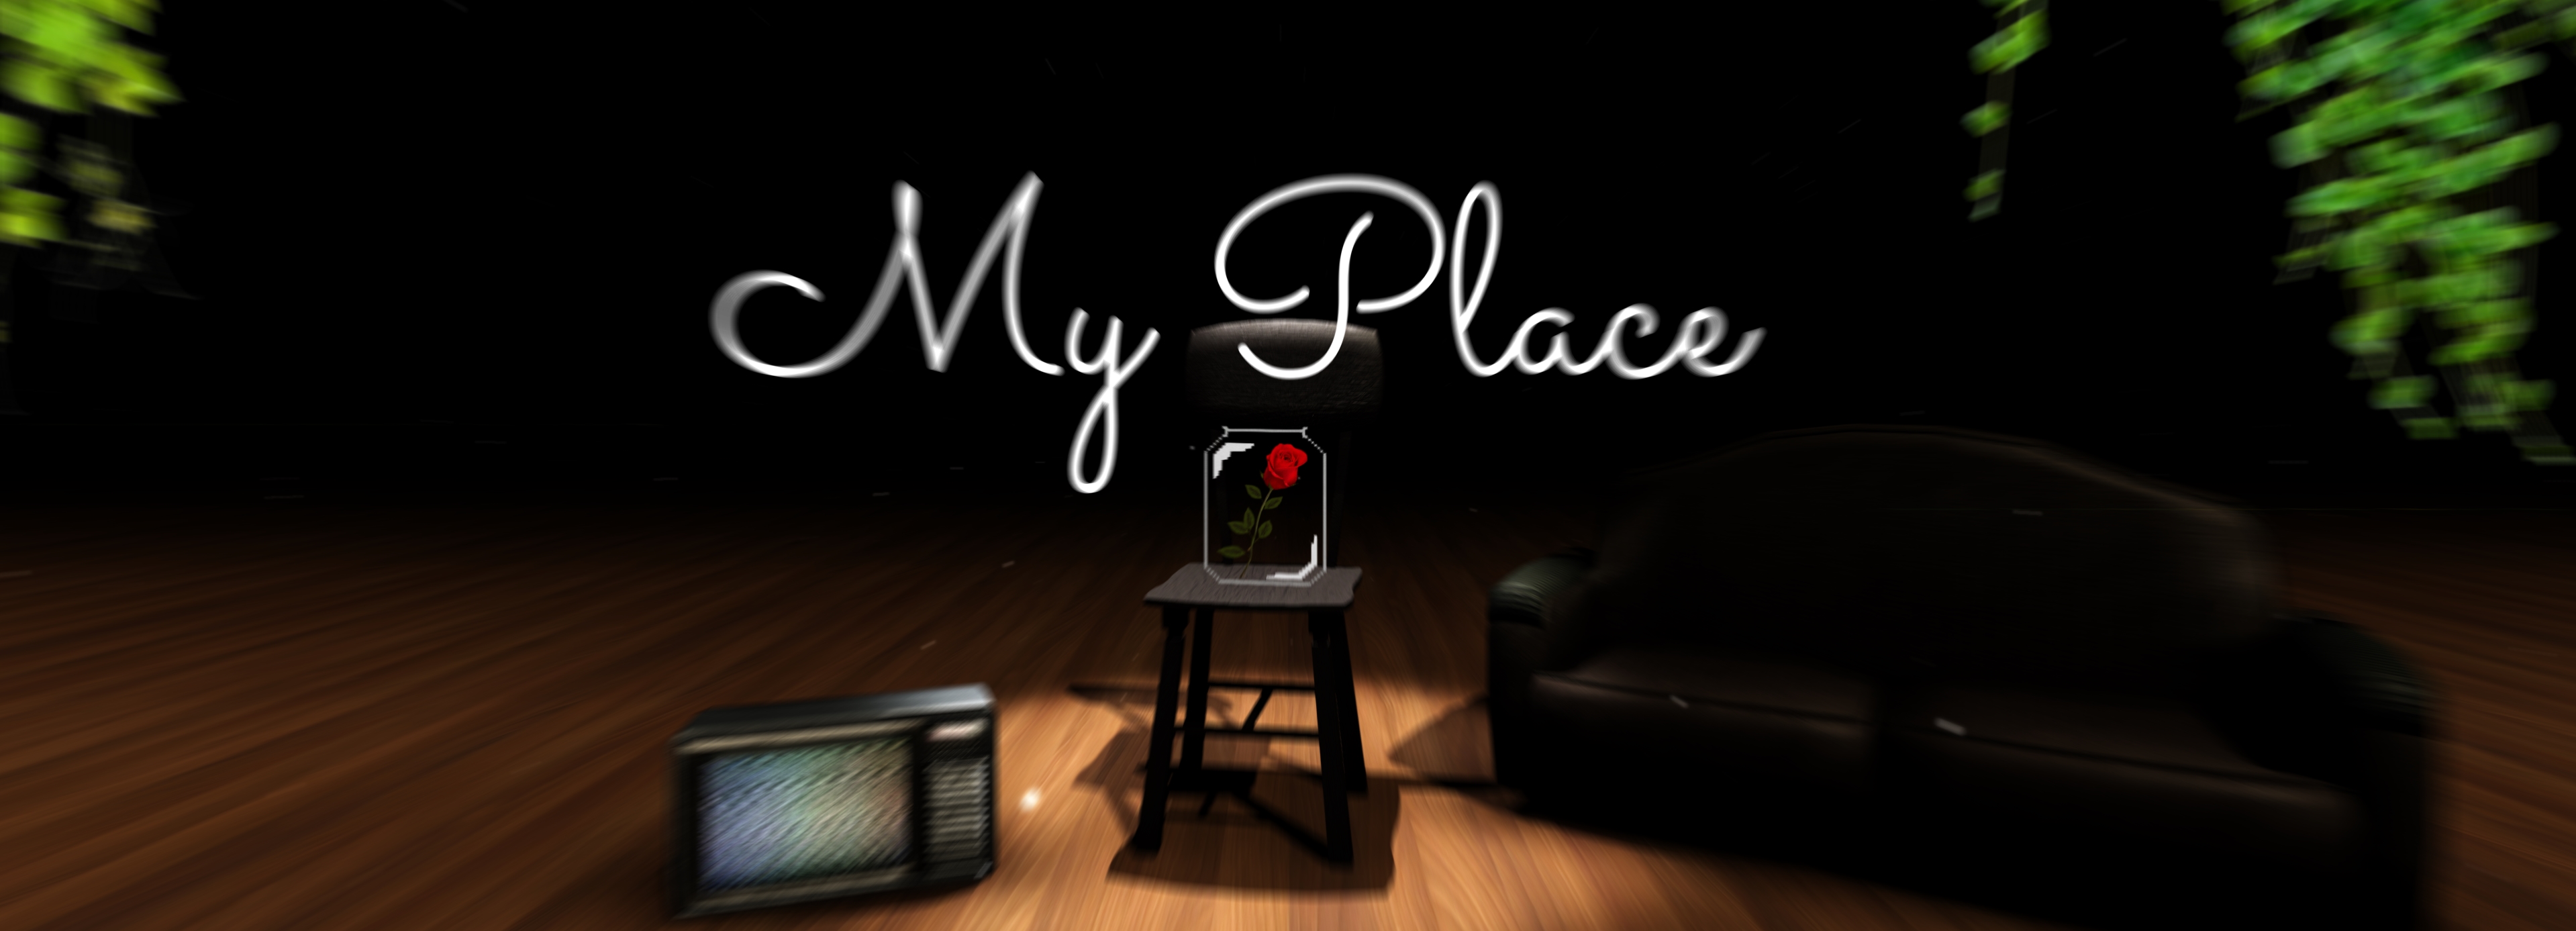 To my place next sunday. My place игра. Special place картинки. My place xerstudios. Дарк Плейс Красноярск 360.